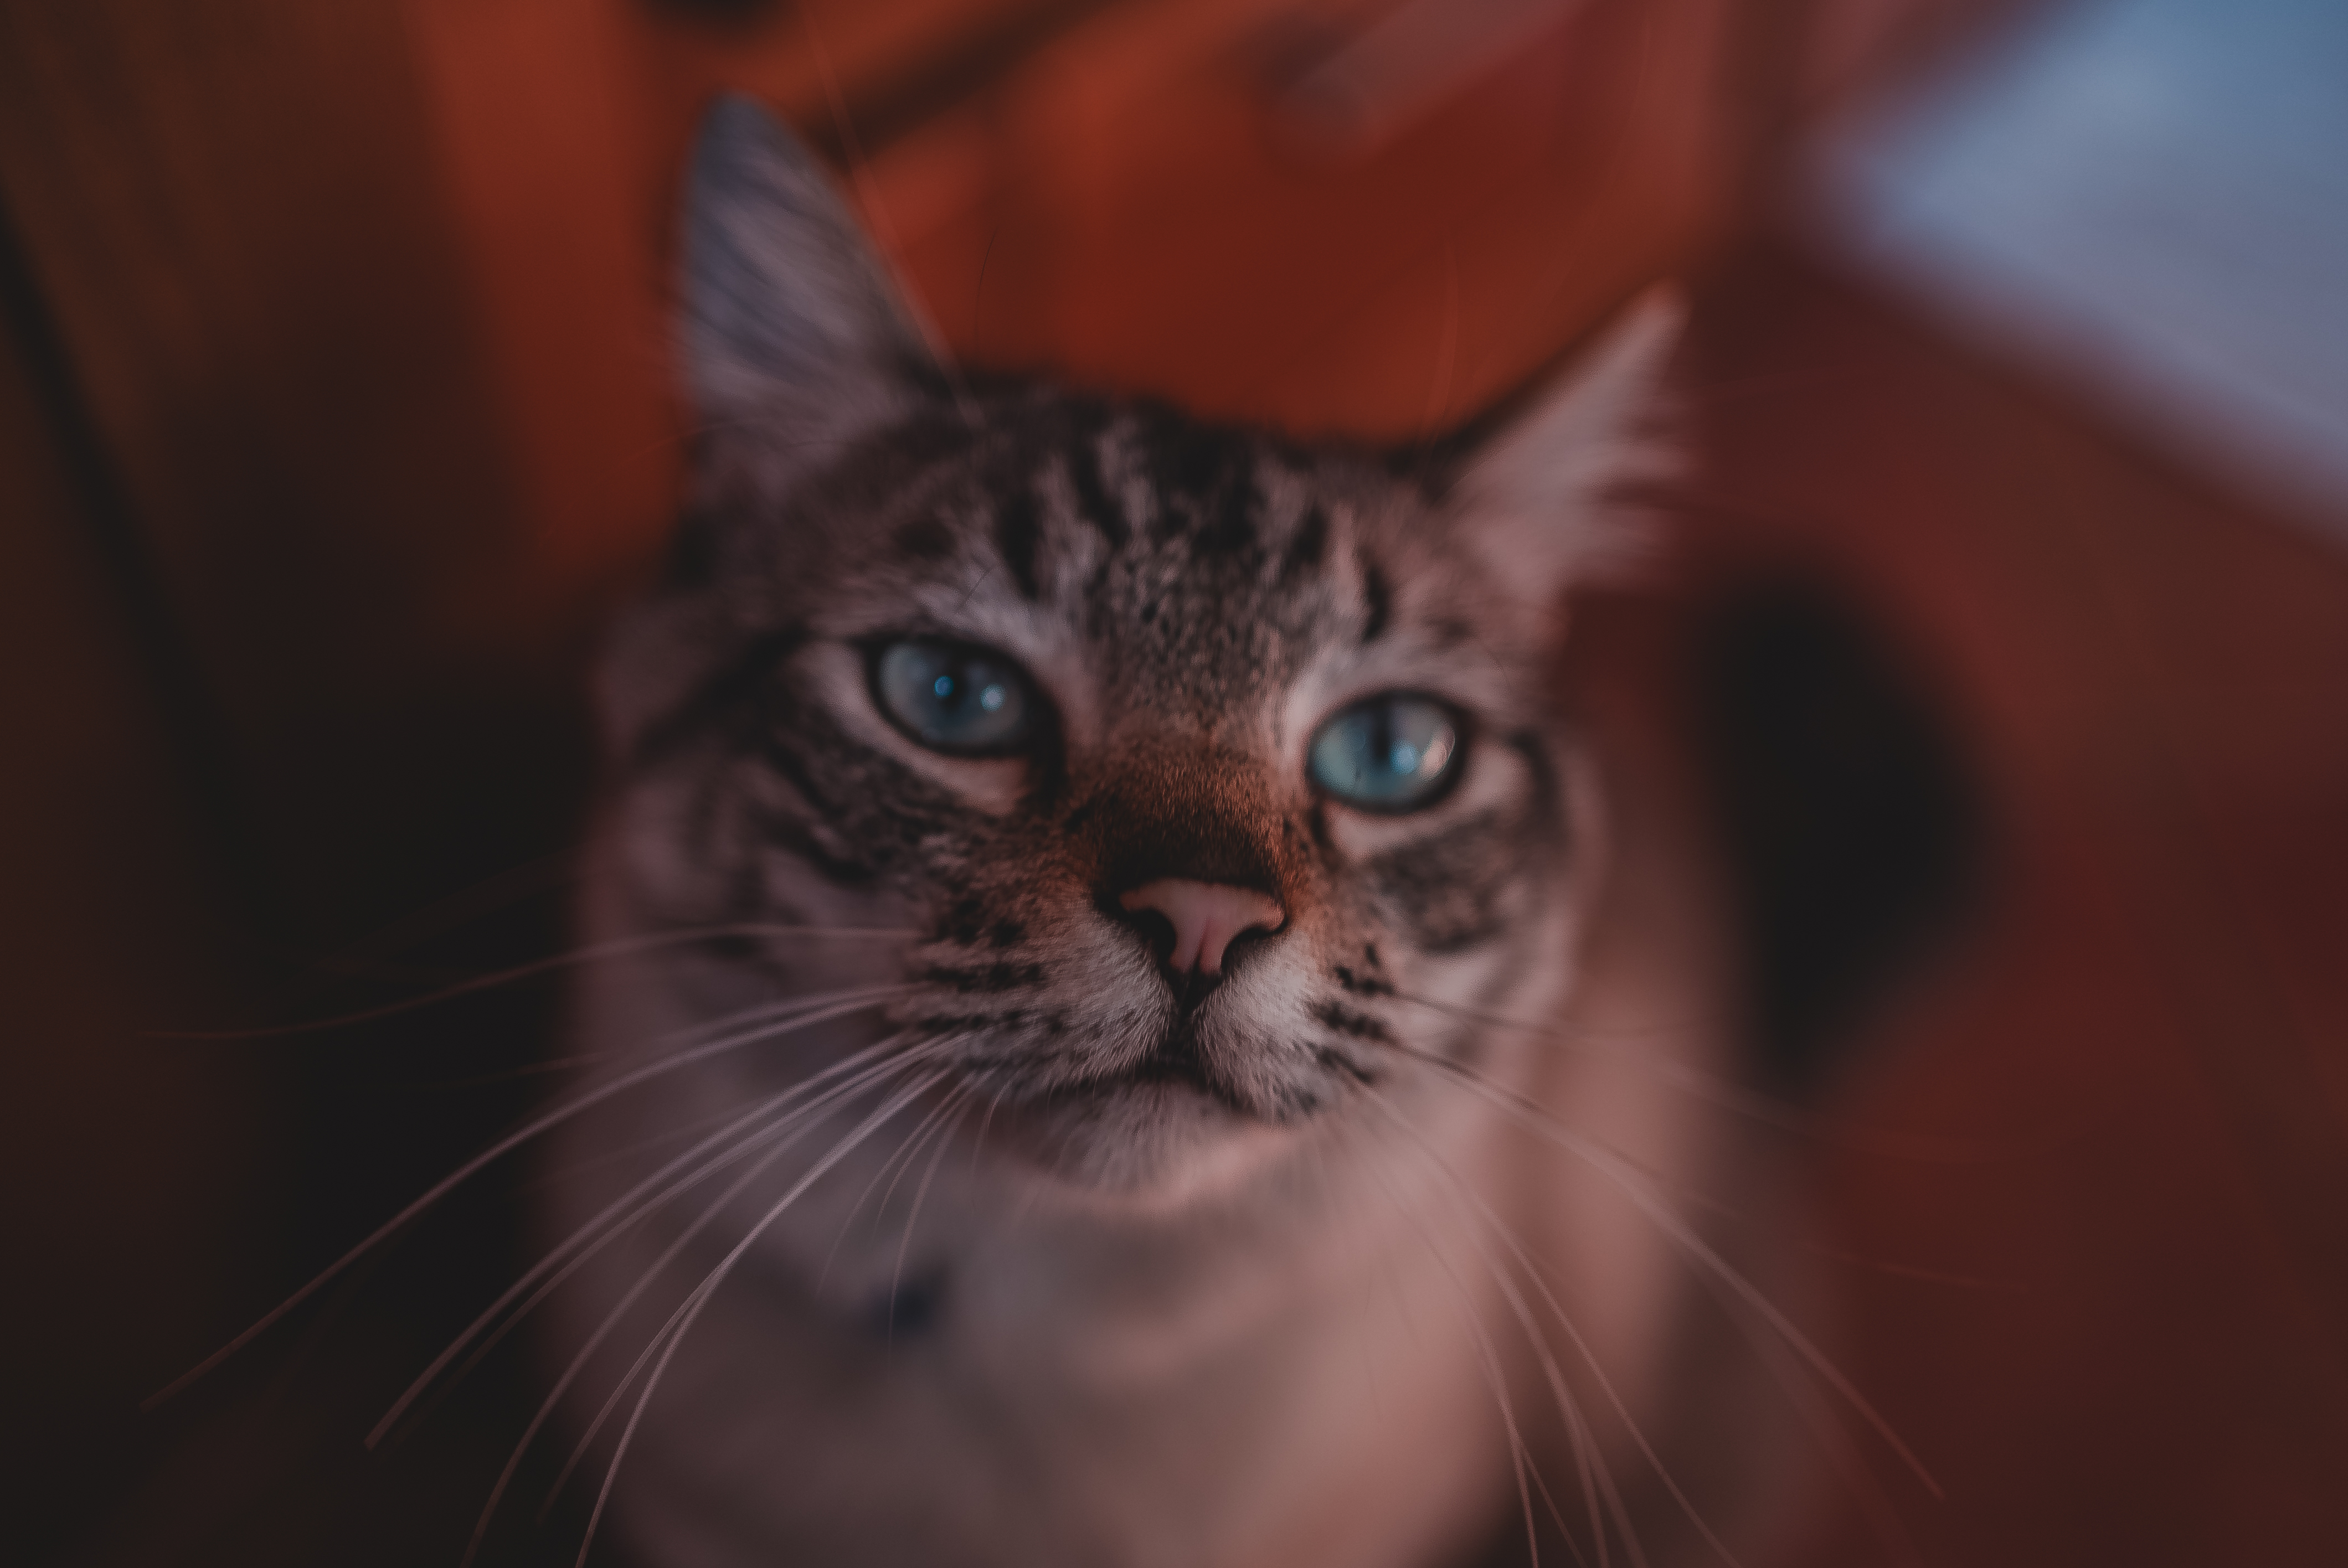 General 4240x2832 sony a7 indoors animals feline closeup mammals cat eyes whiskers